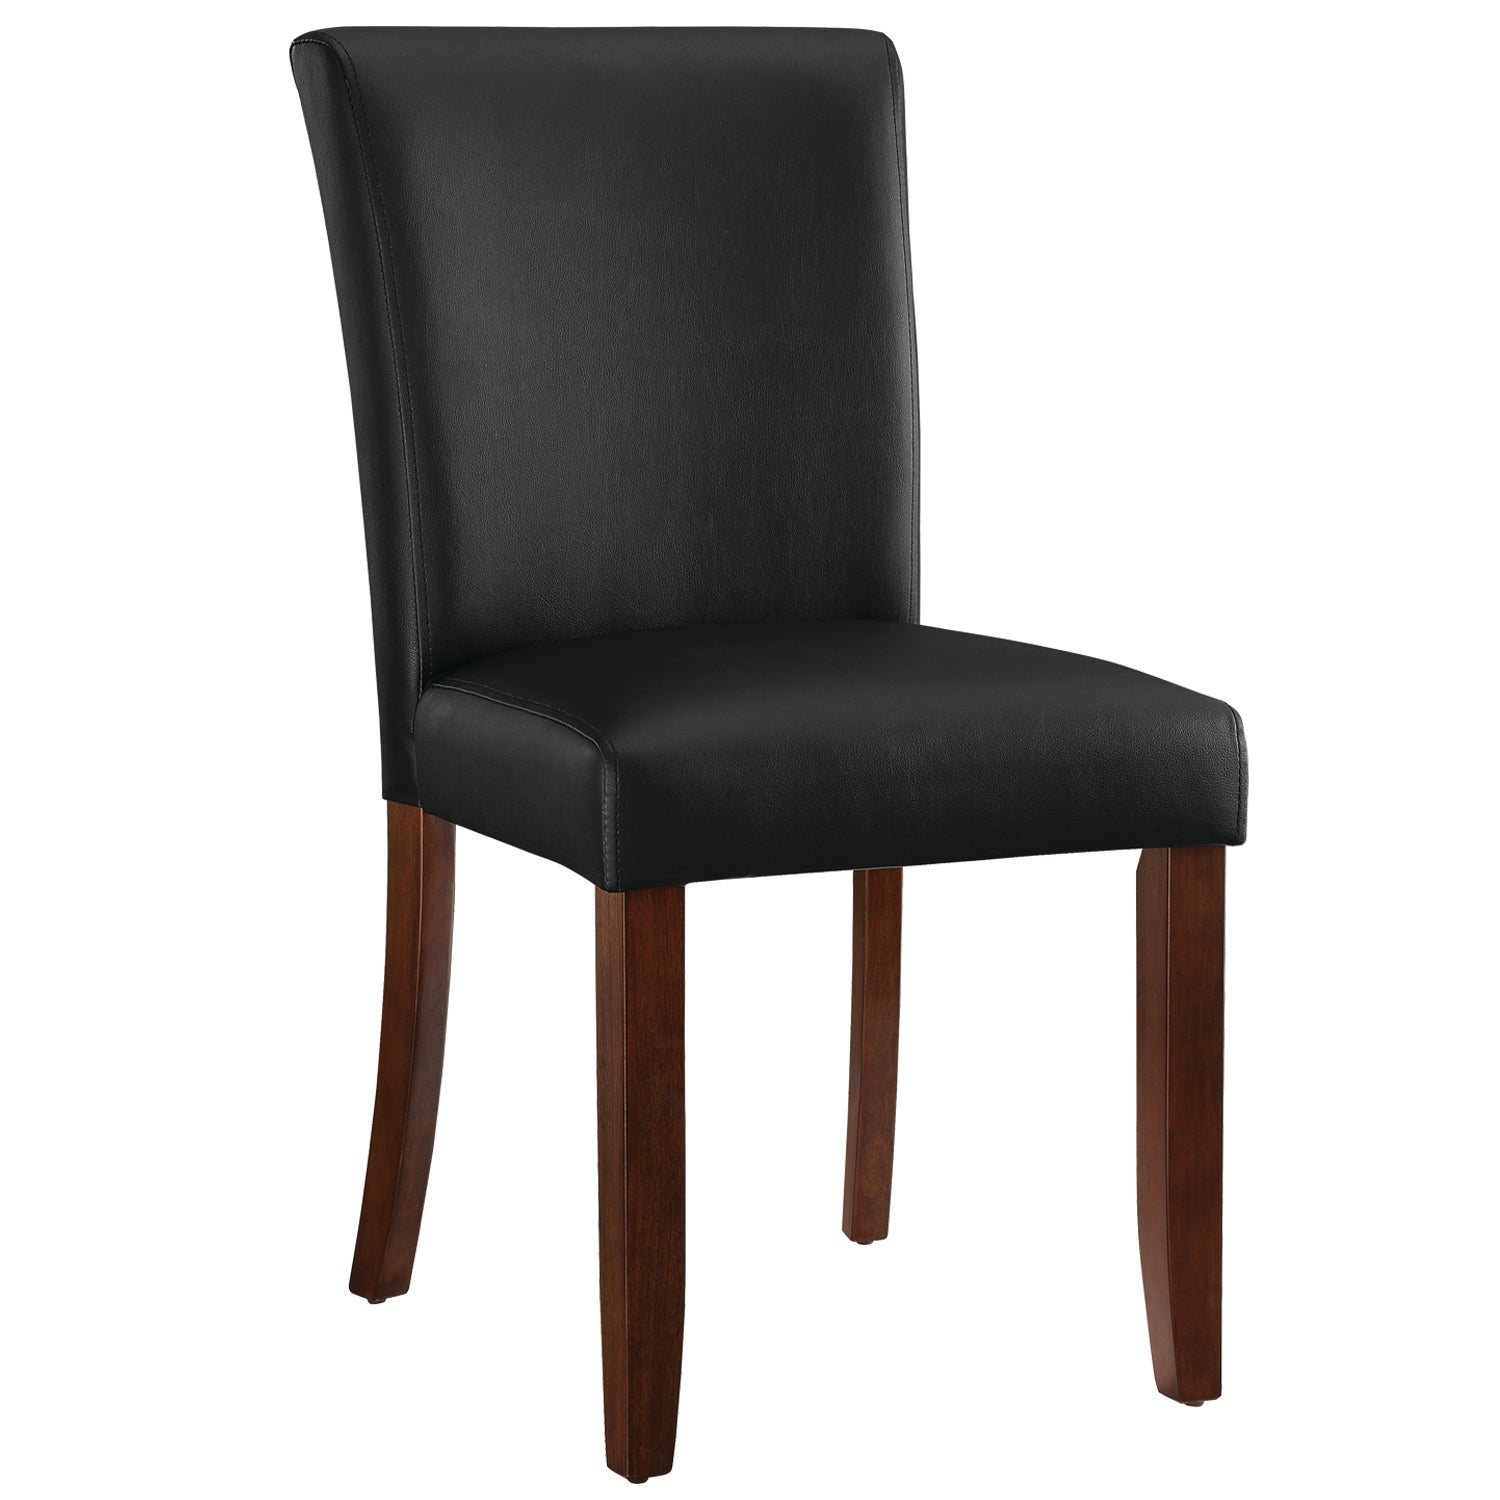 GAME/DINING CHAIR - CAPPUCCINO